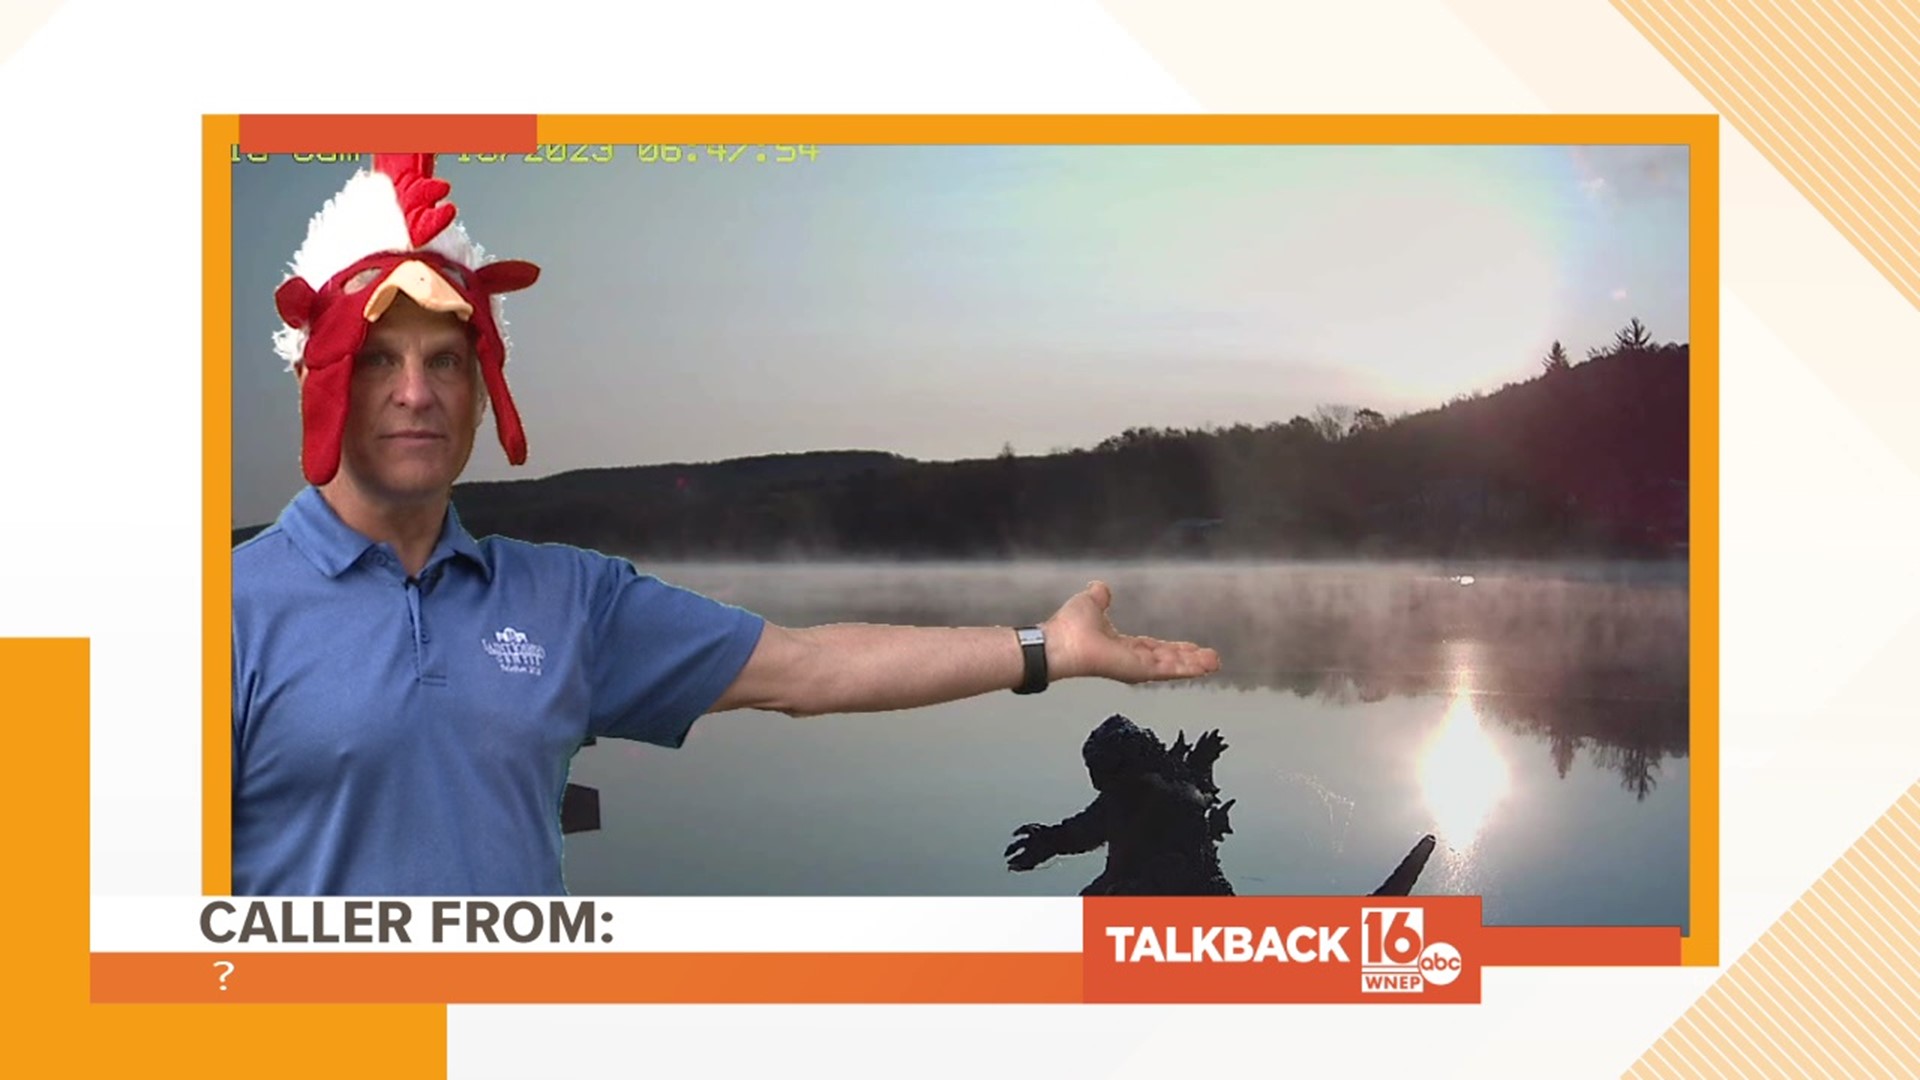 A number of callers comment on WNEP's morning meteorologist and his fascination with chickens.